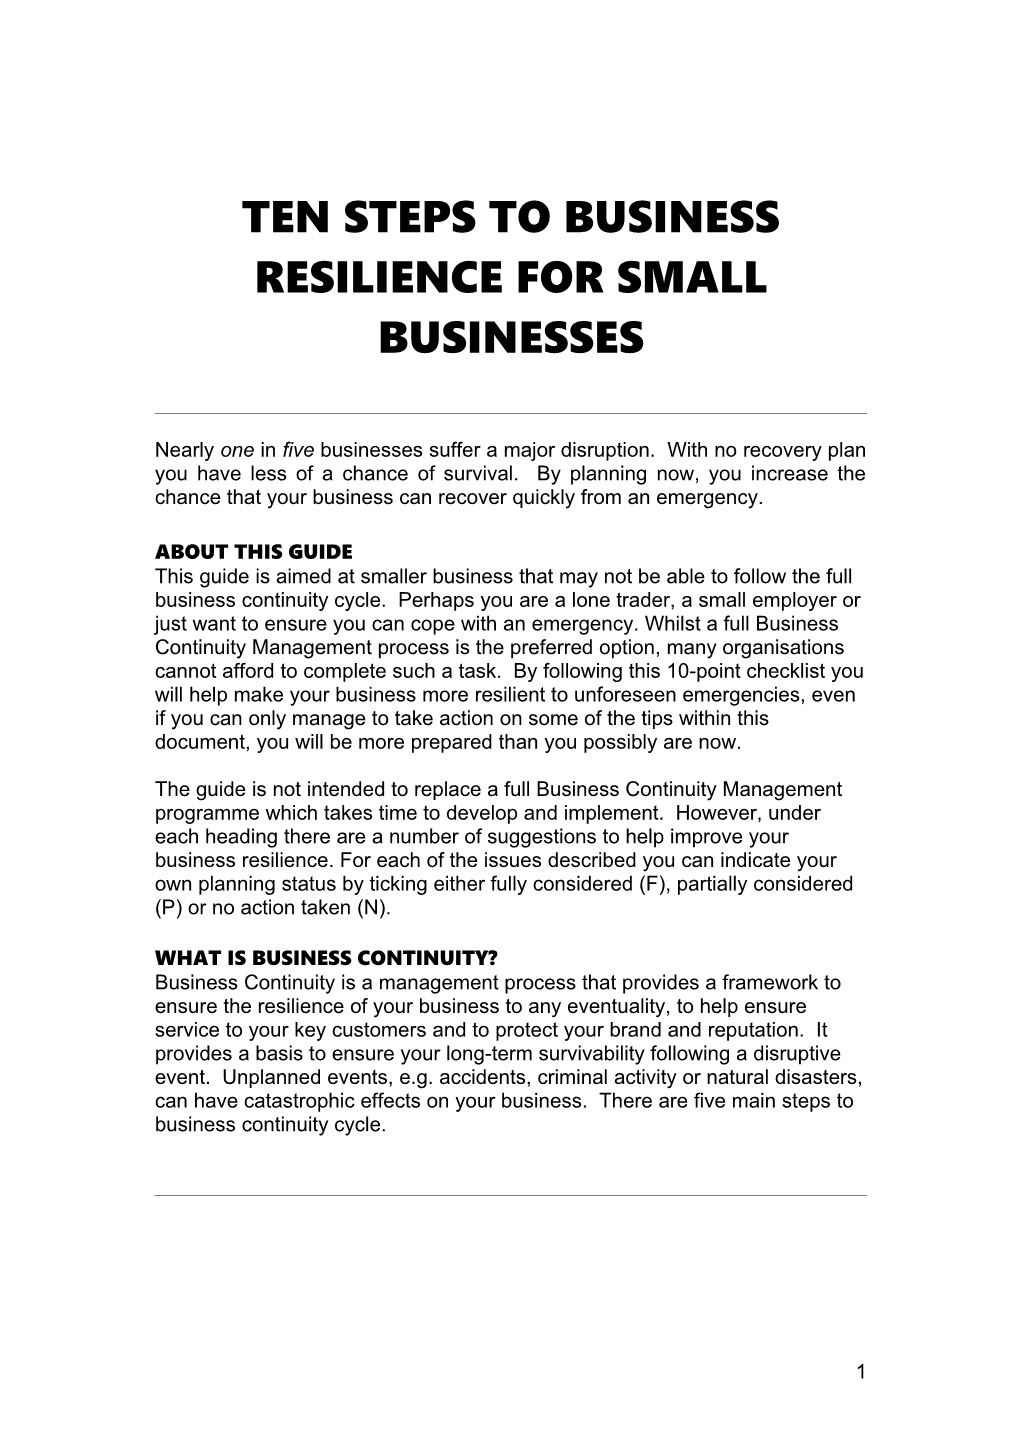 10 Steps to Business Resilience Smaller Businesses